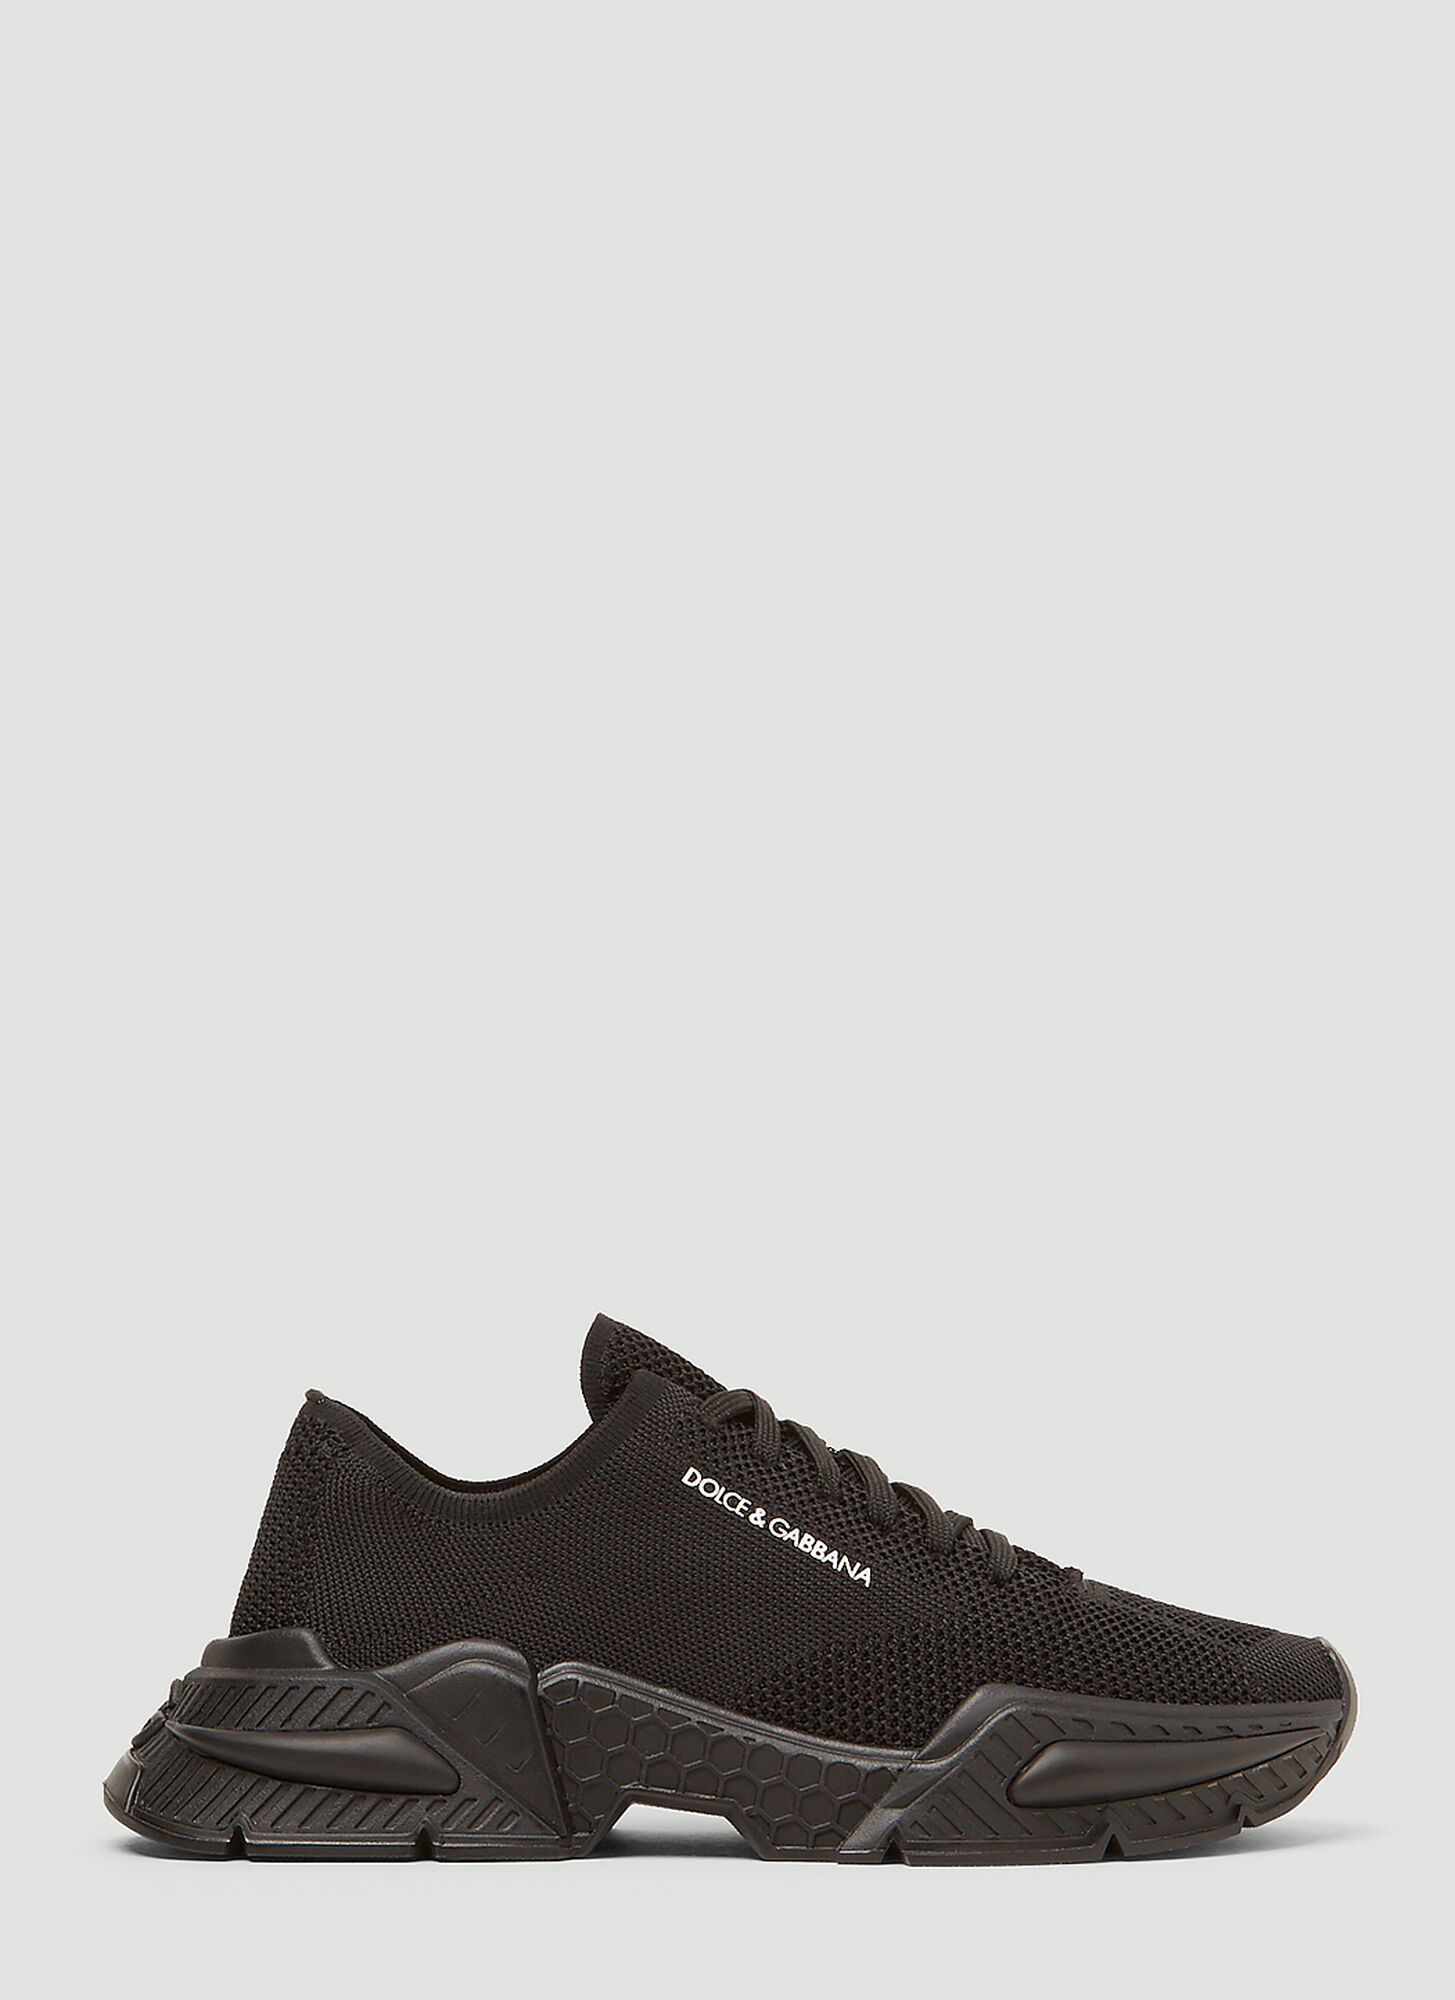 Dolce & Gabbana Stretch Knit Airmaster Sneakers In Black